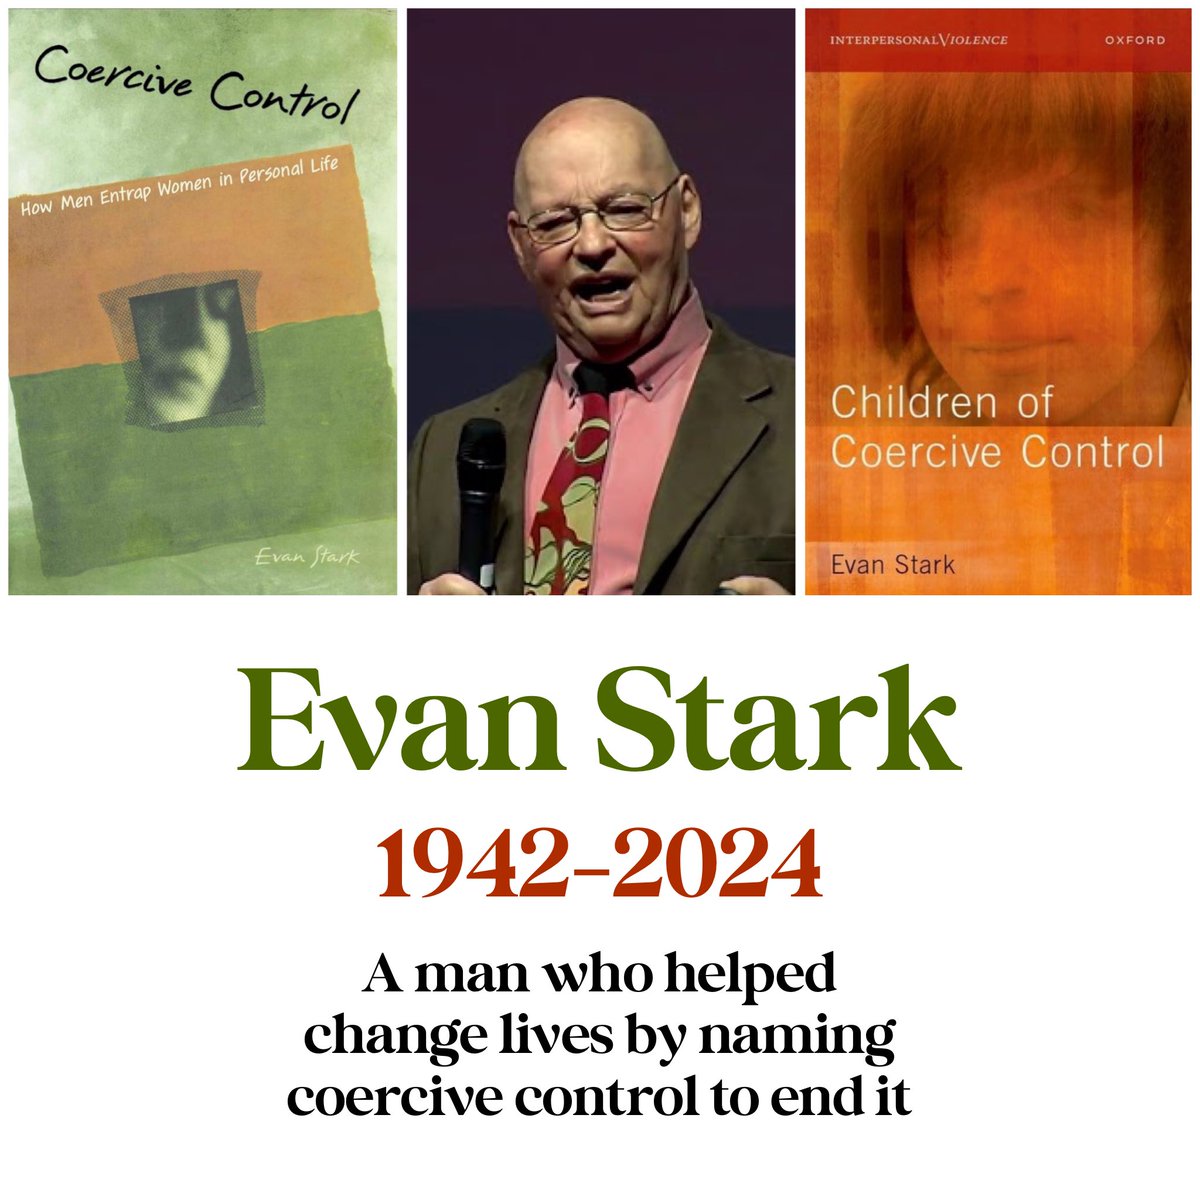 Our community is saddened to hear of the passing of one of the great ones, Evan Stark. He wrote about coercive control to end it in 2009 & just graced us w his powerful work on children. Between these books he spoke, shared and saved lives. So many of us are eternally grateful.